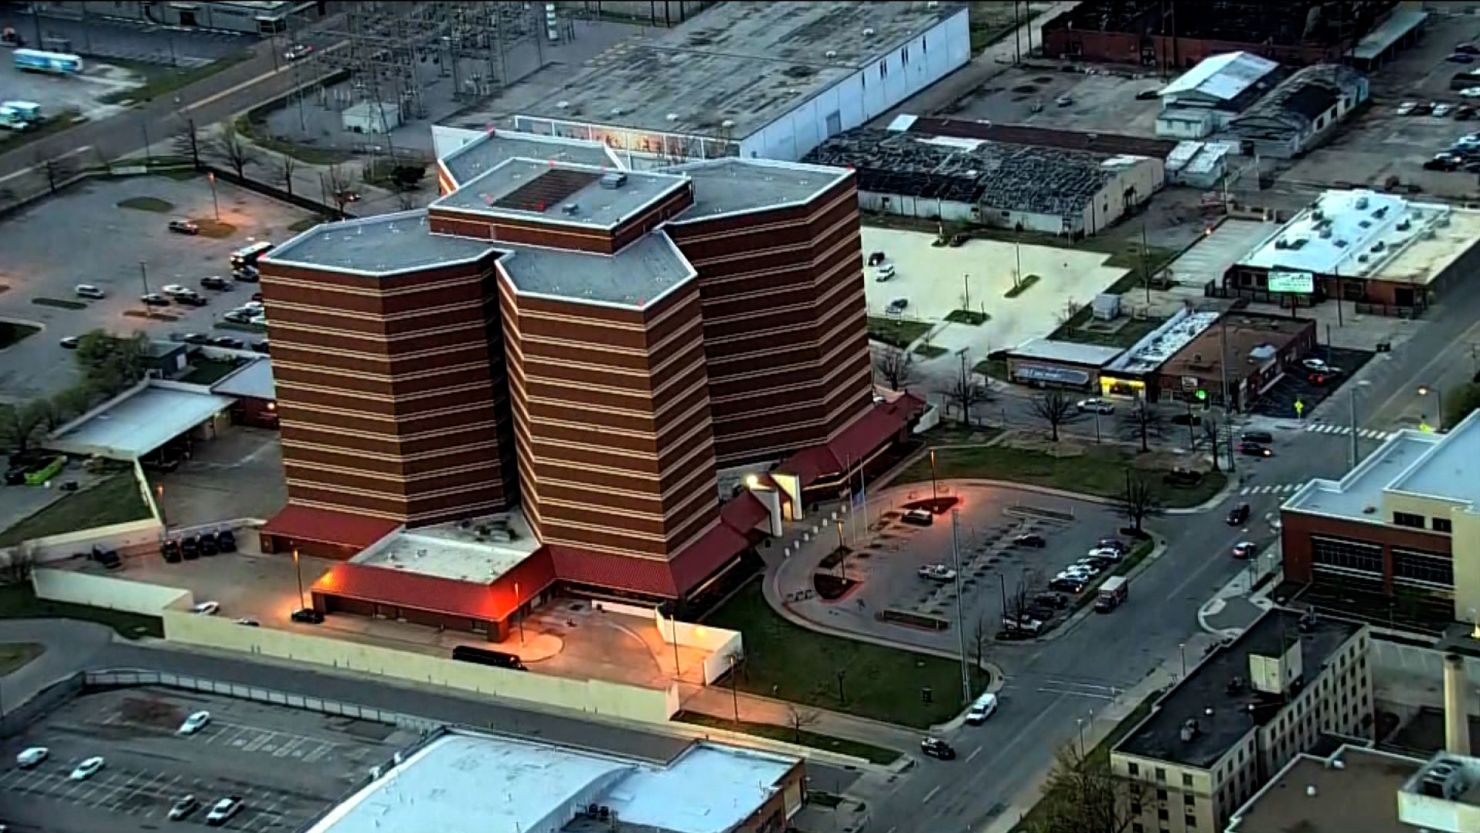 One inmate is dead and a correctional officer is hospitalized after being taken hostage at the Oklahoma County Detention Center in Oklahoma City.